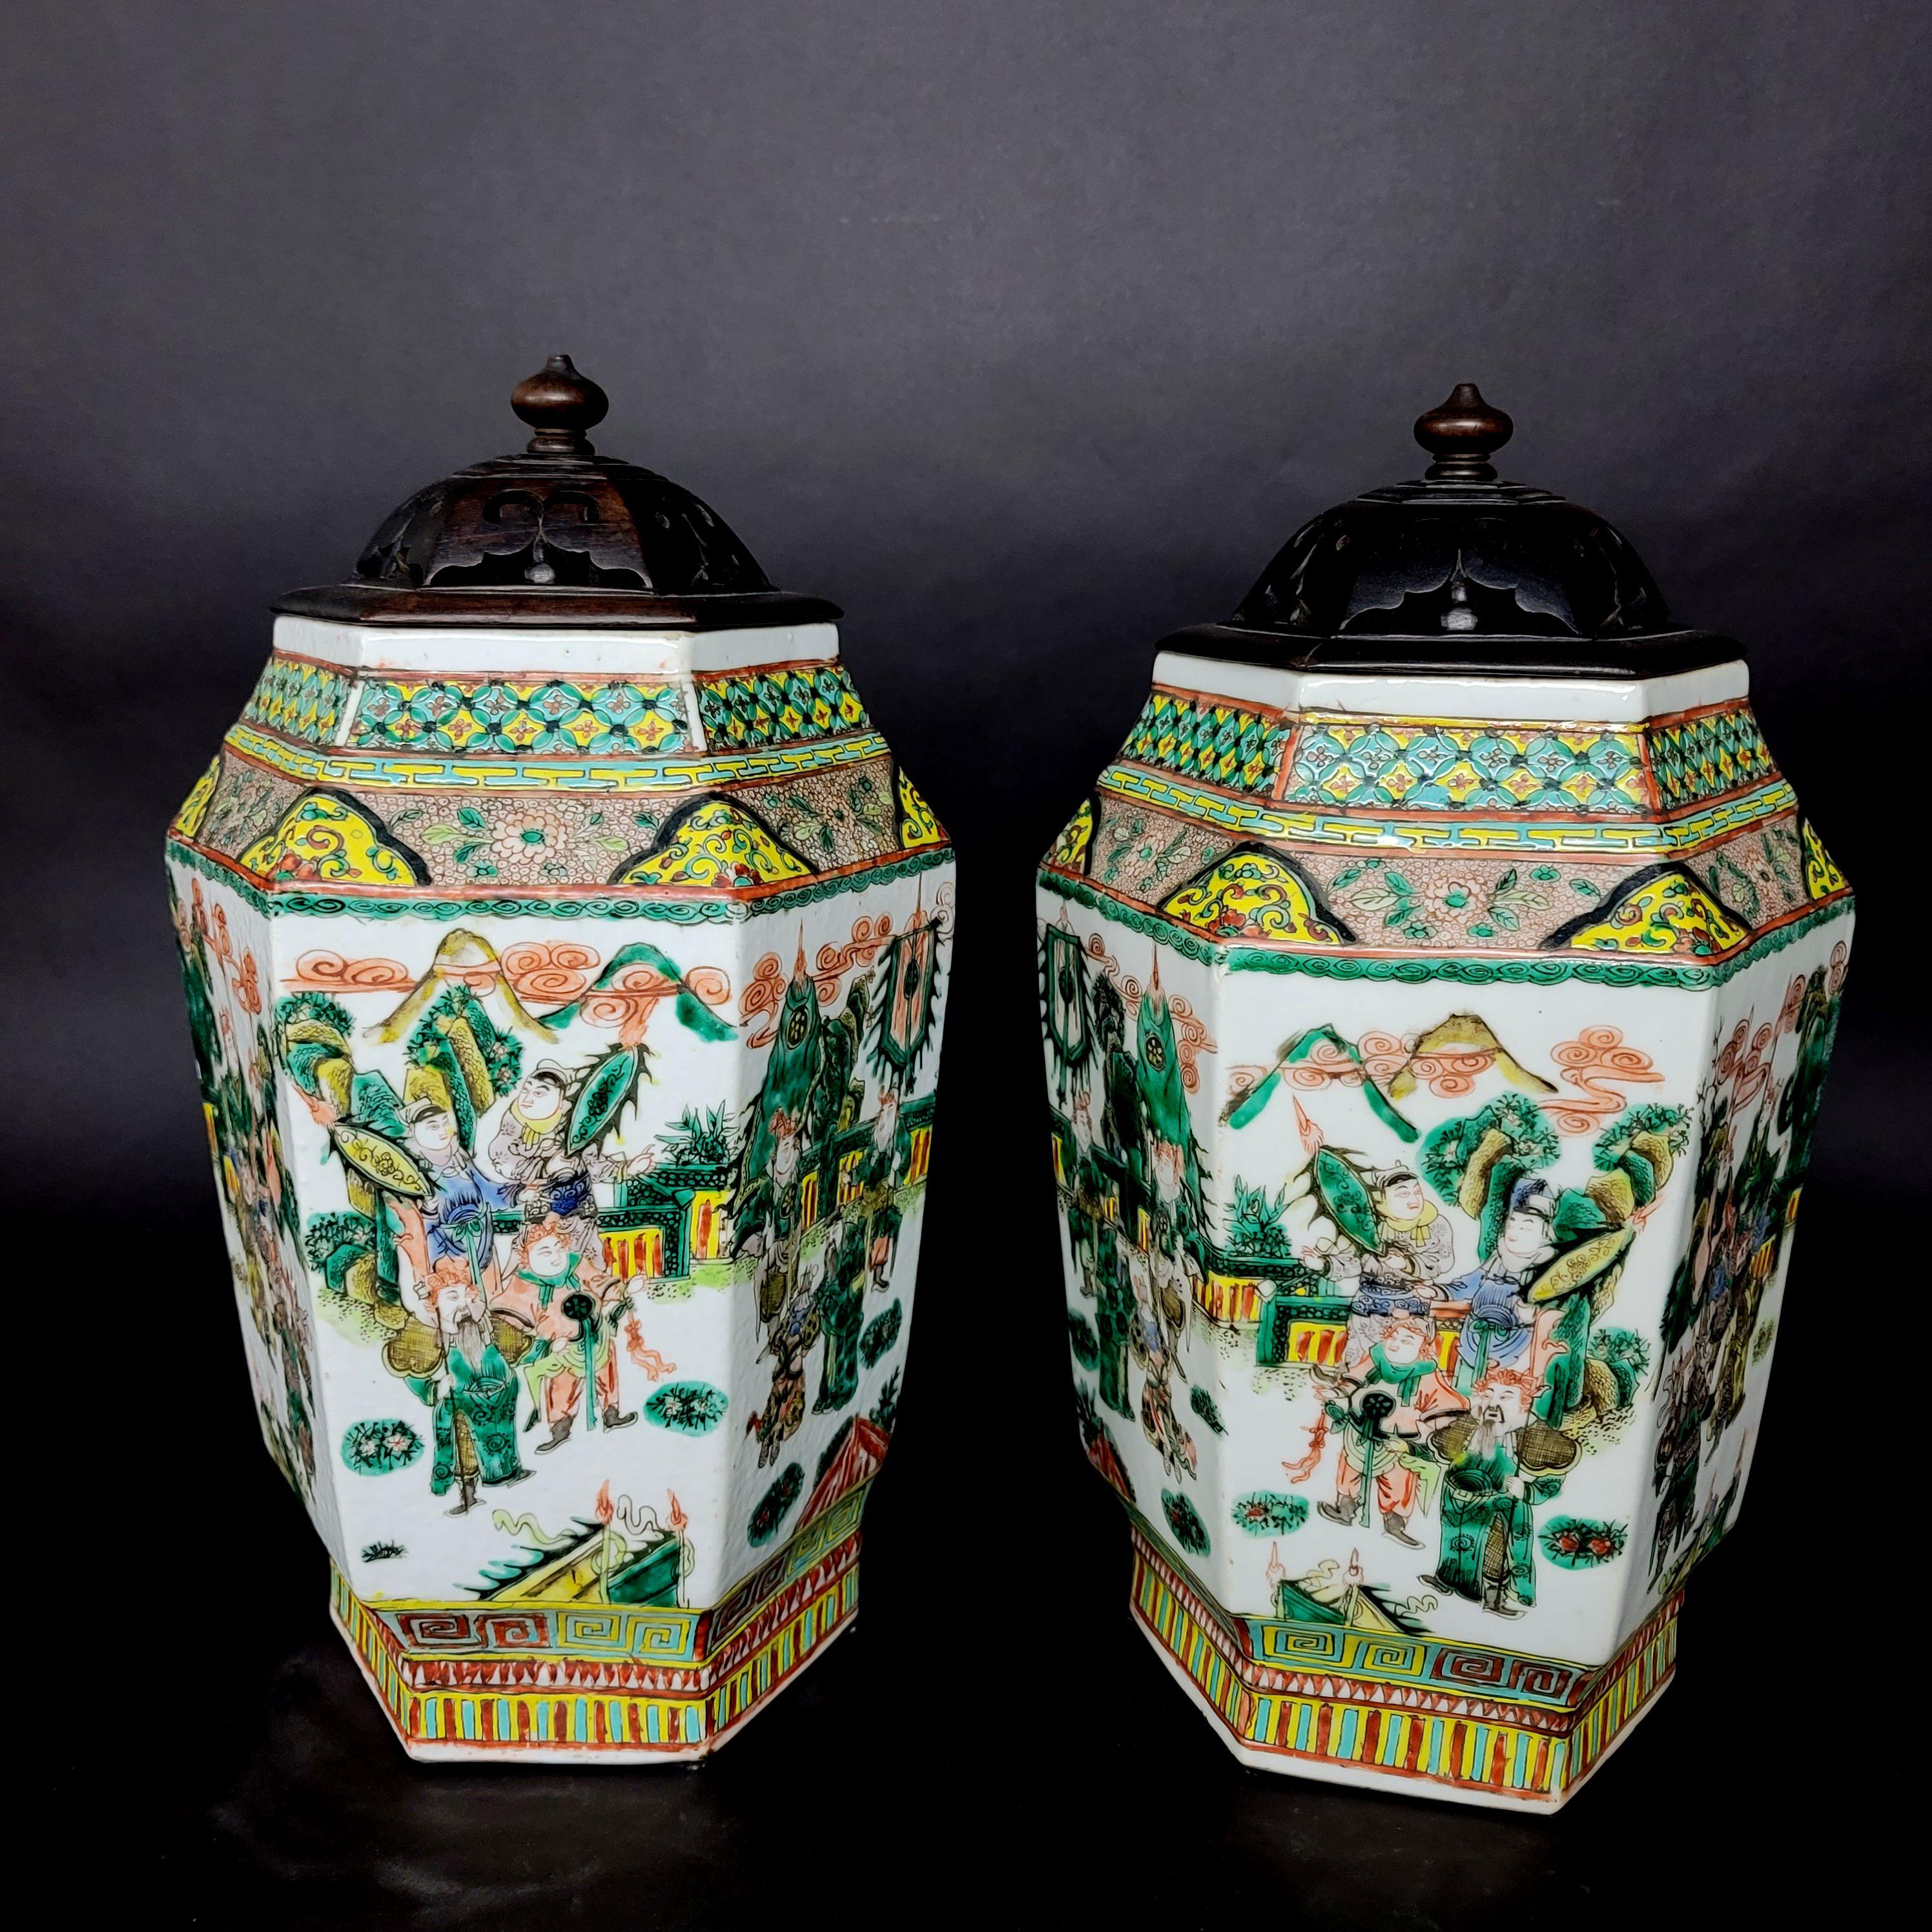 Matching Pair of Chinese Hexagonal Porcelain Vases, 19th Century For Sale 1